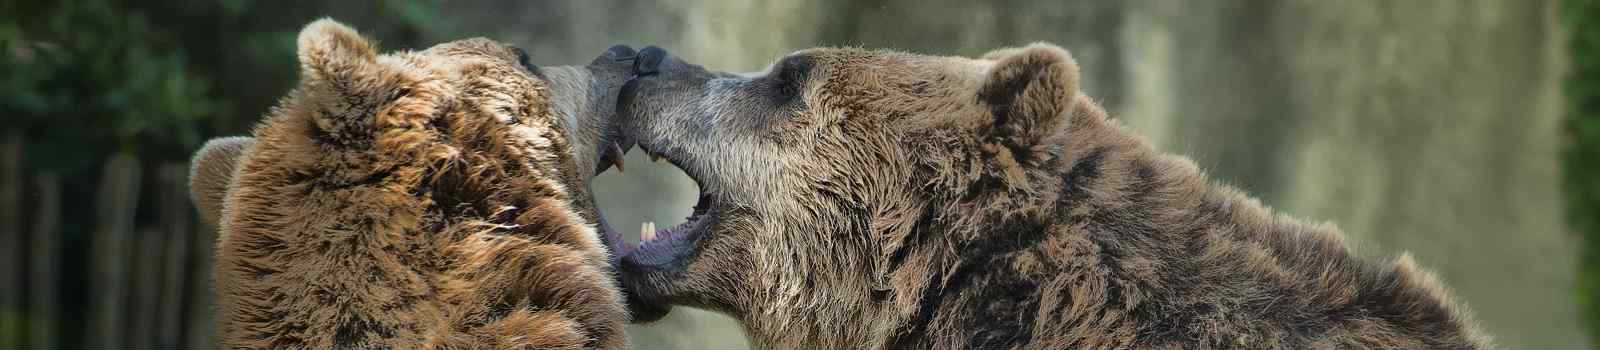 BUS-ERL-OCAD -Kanada Two brown grizzly bears while fighting close up portrait